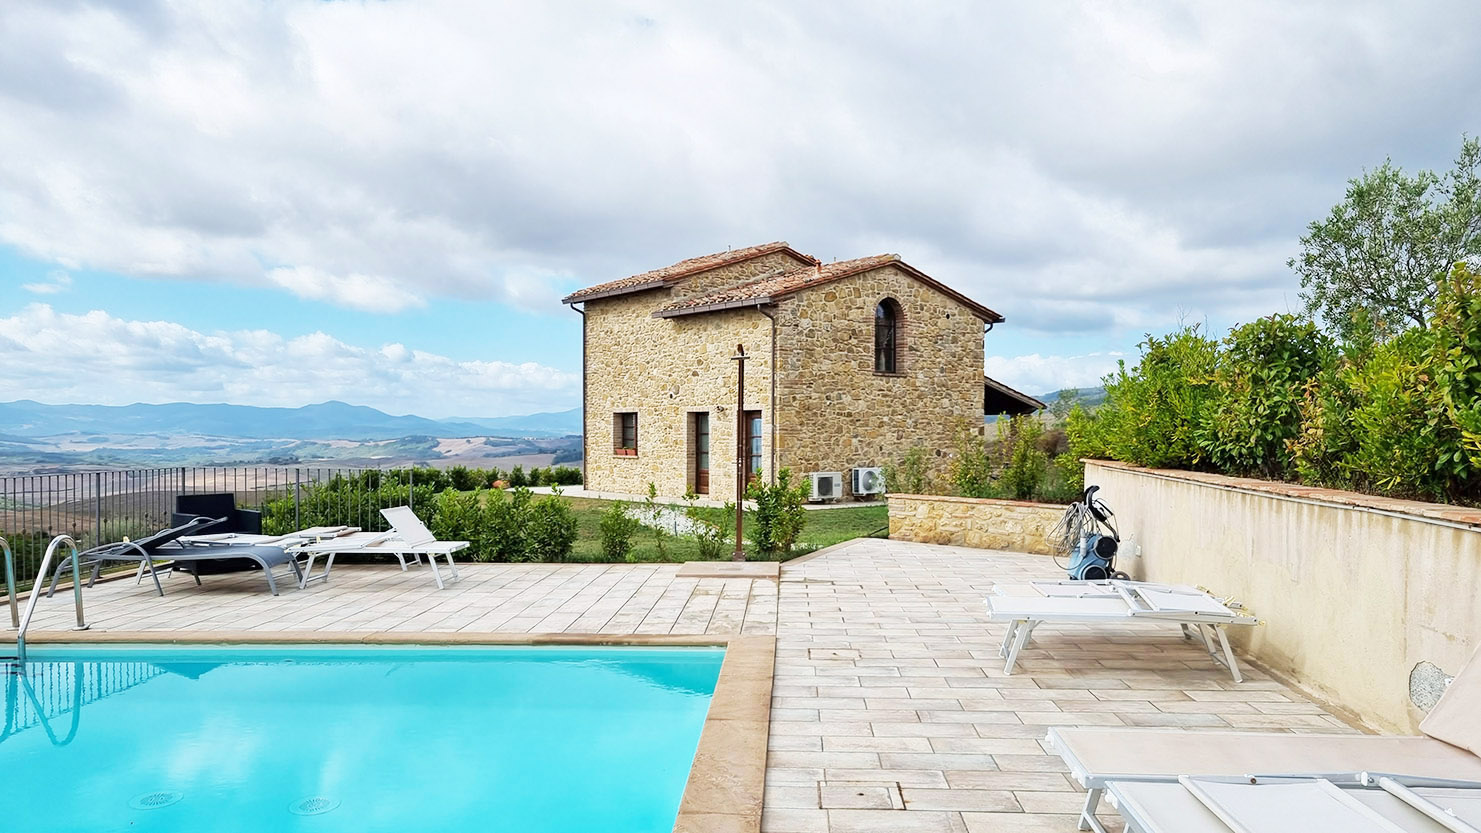 A+ RATING FARMHOUSE, 1 BDR, SHARED SALT WATER SWIMMING POOL, VOLTERRA, PISA TUSCANY